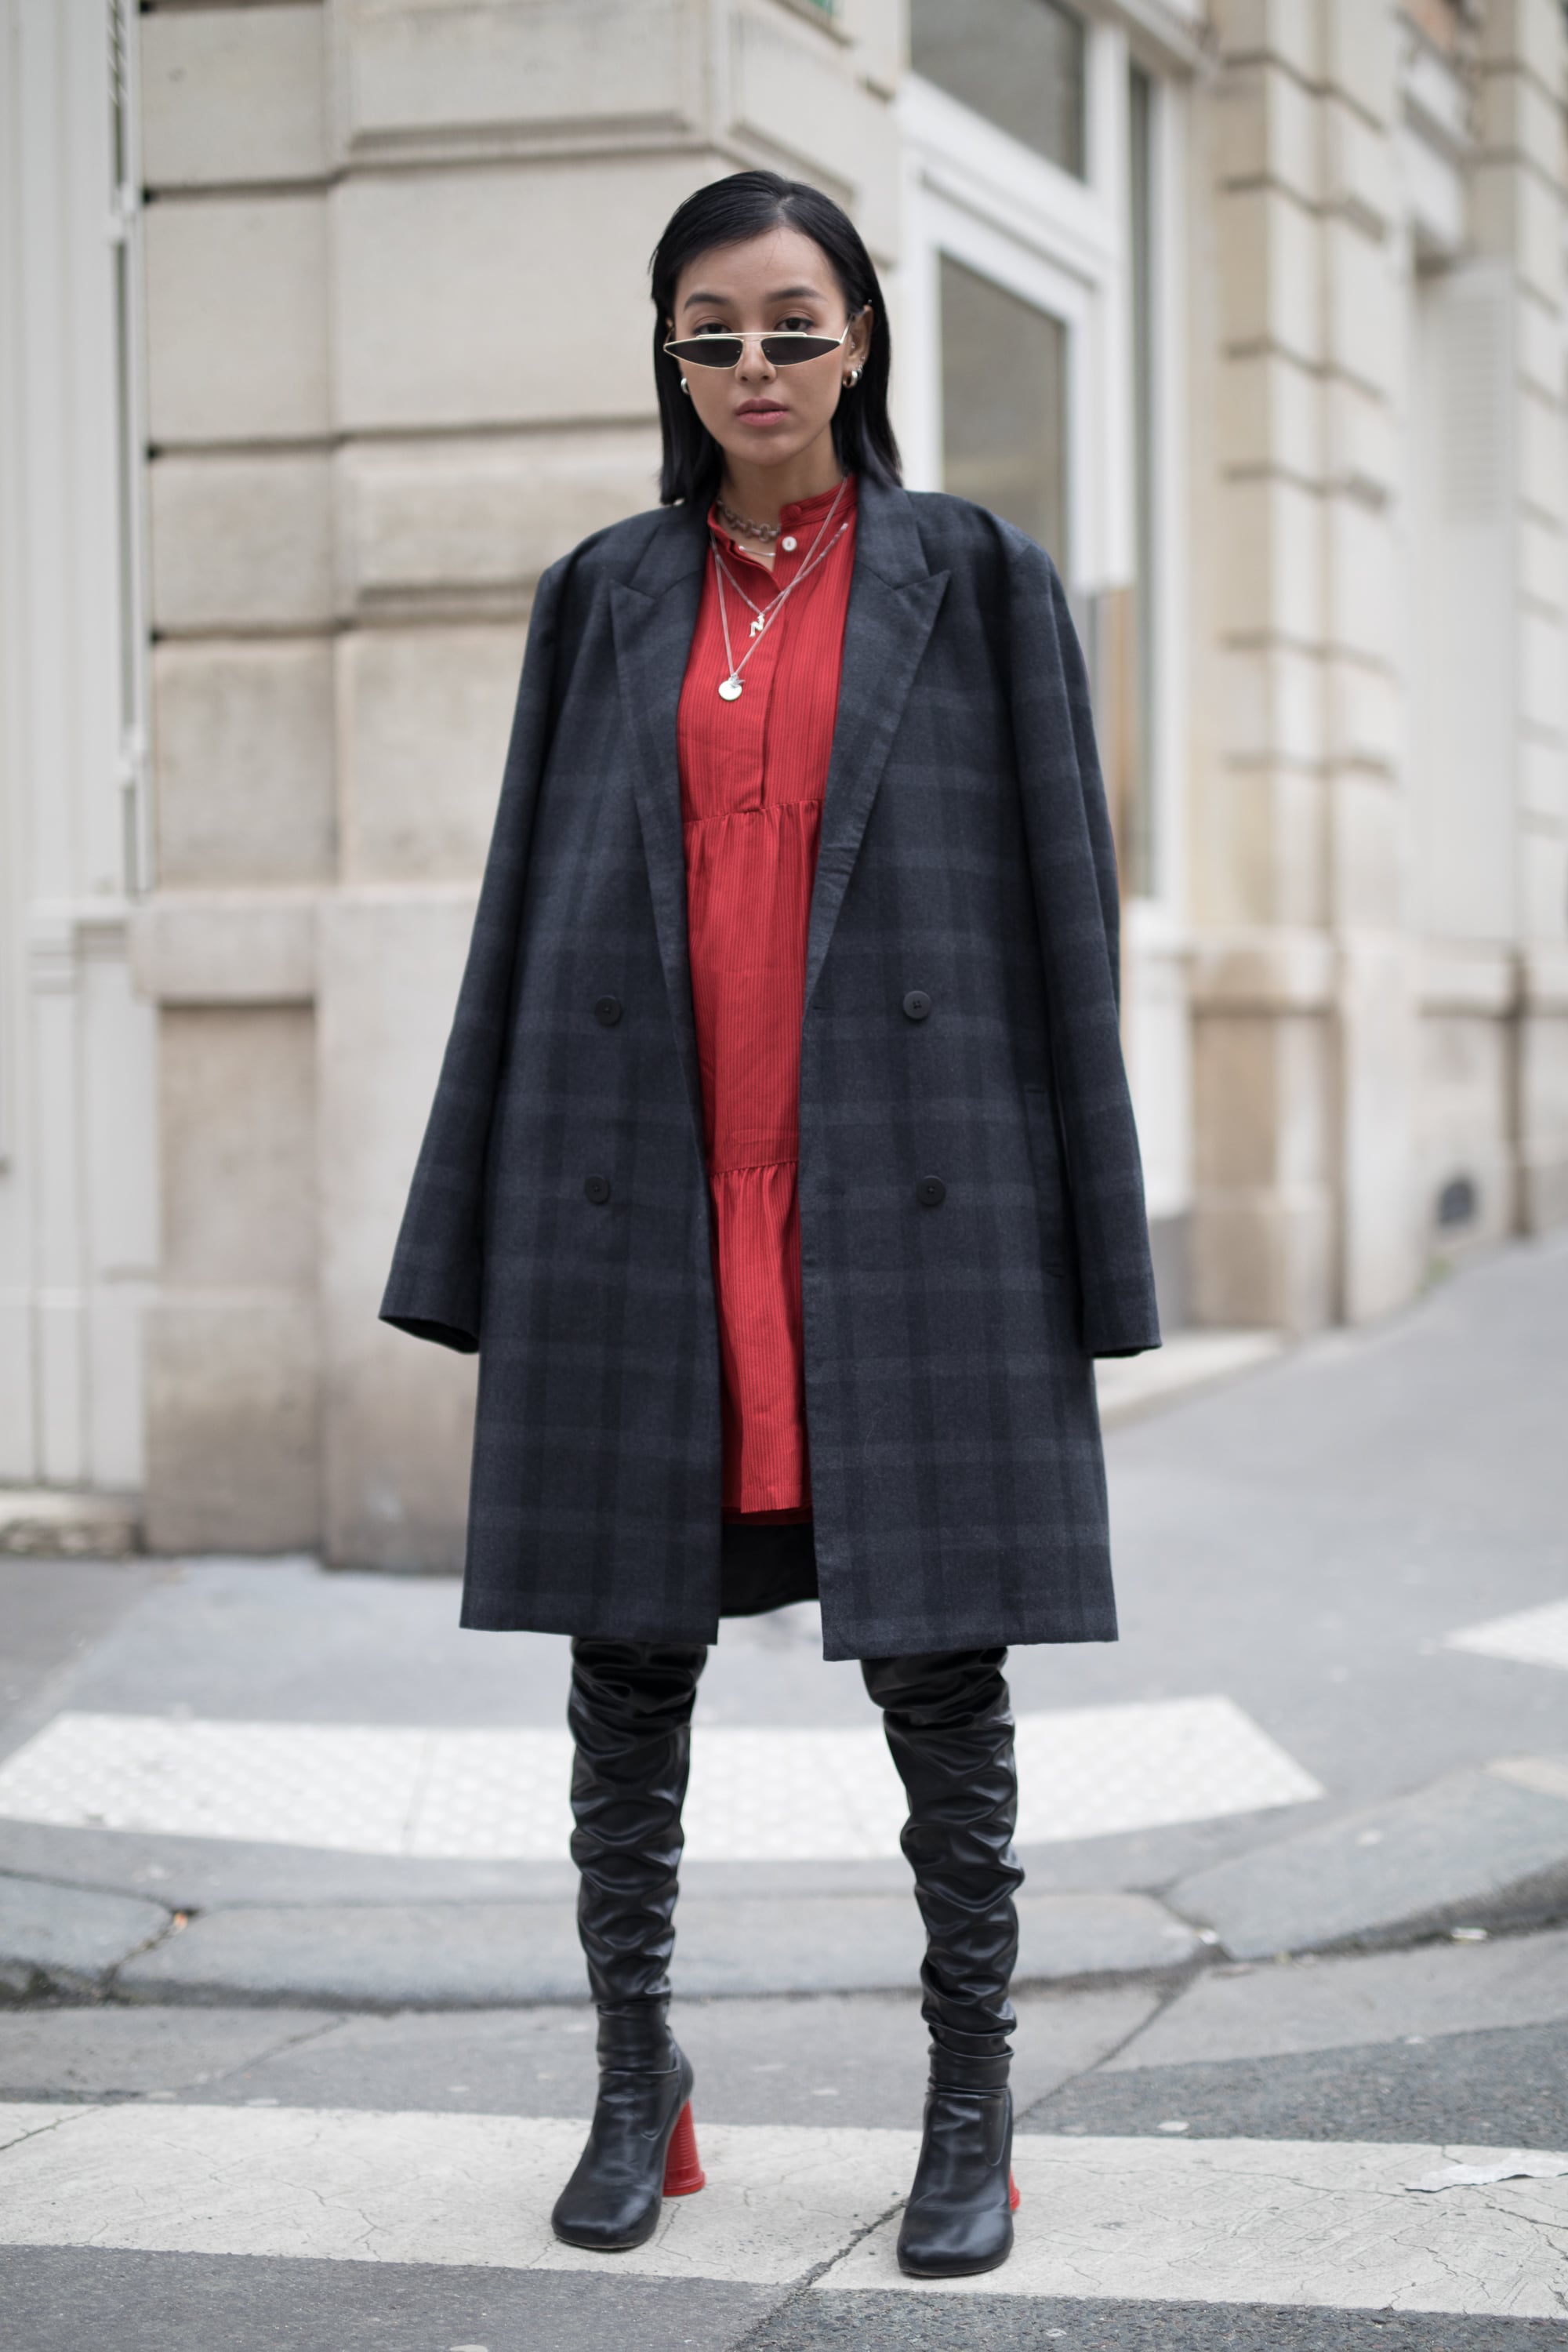 Style Slouchy Thigh-Highs With a Red Dress and Plaid Coat | How to Style  Your Boots This Winter — 30 Easy Outfit Ideas | POPSUGAR Fashion Photo 11